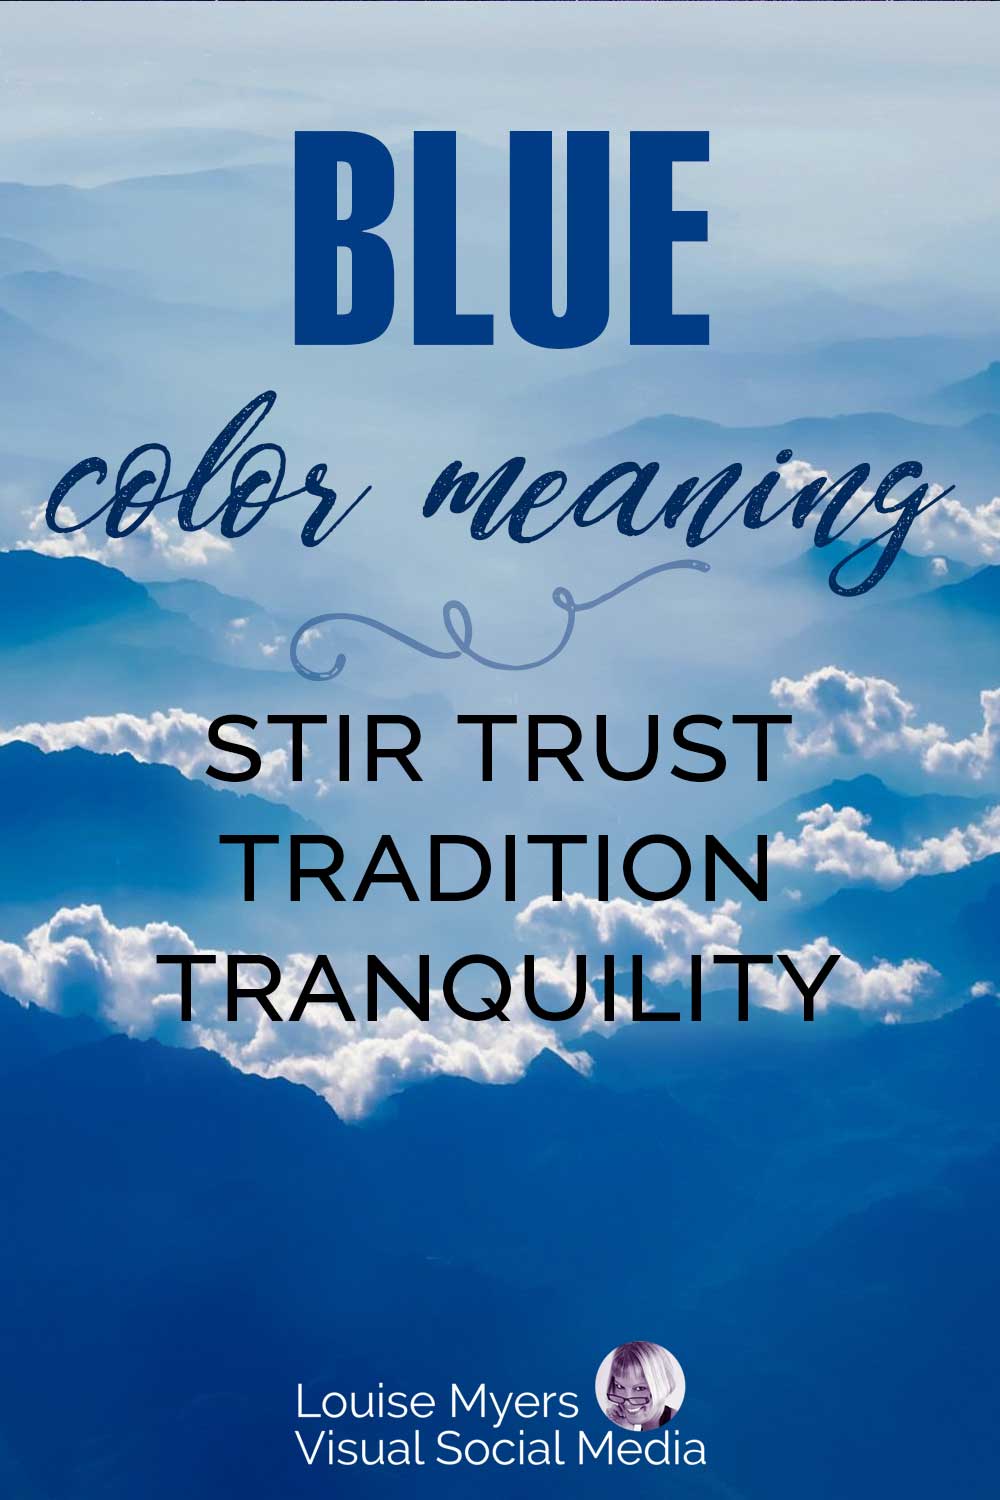 blue mountaintops coming through clouds with text blue color meaning, stir trust, tradition, tranquility.